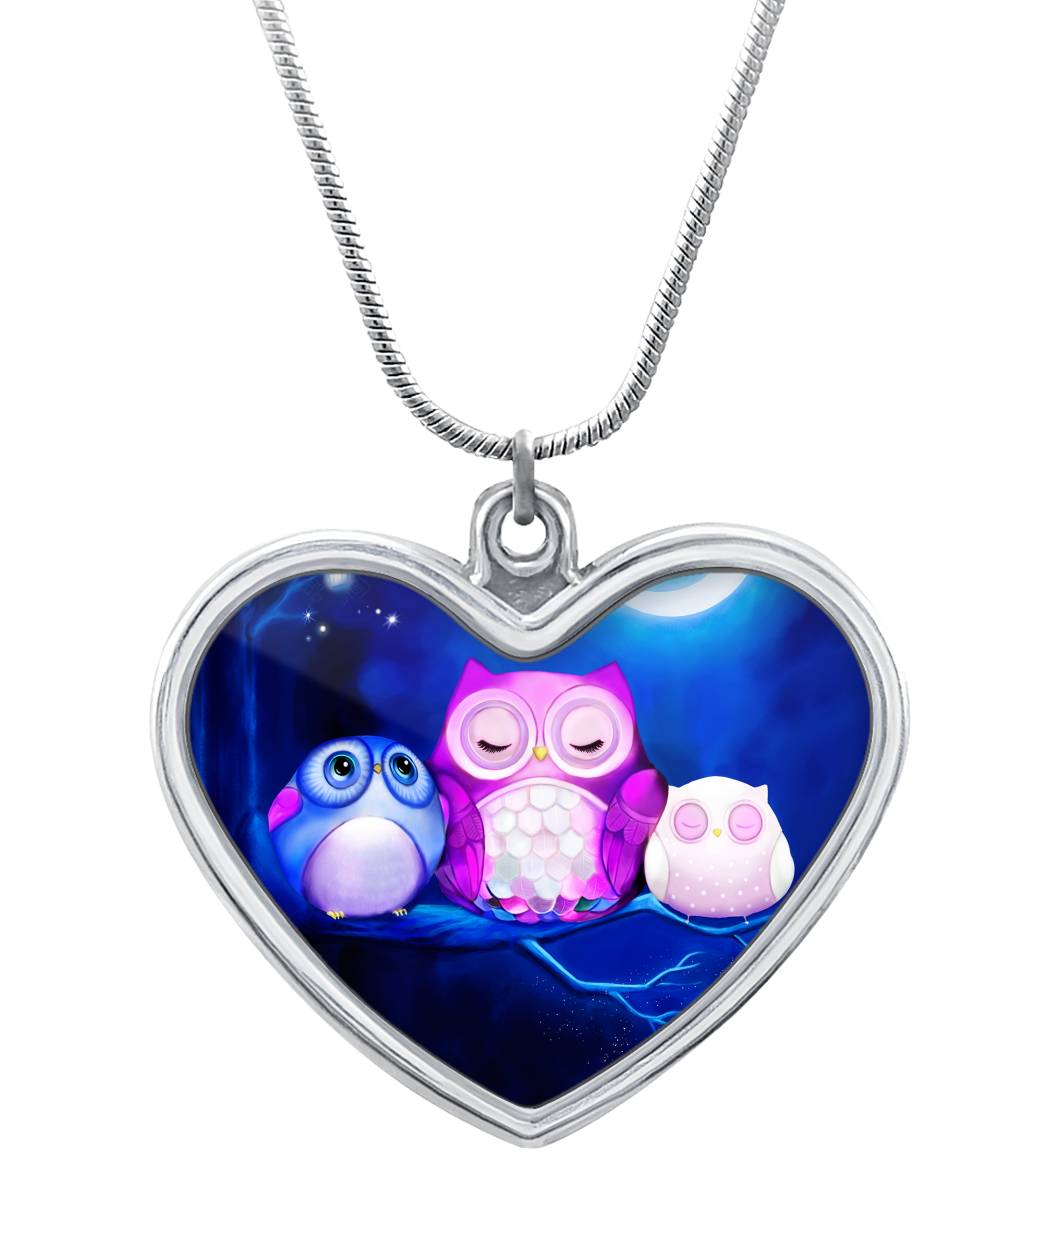 Owl Night Heart Necklace